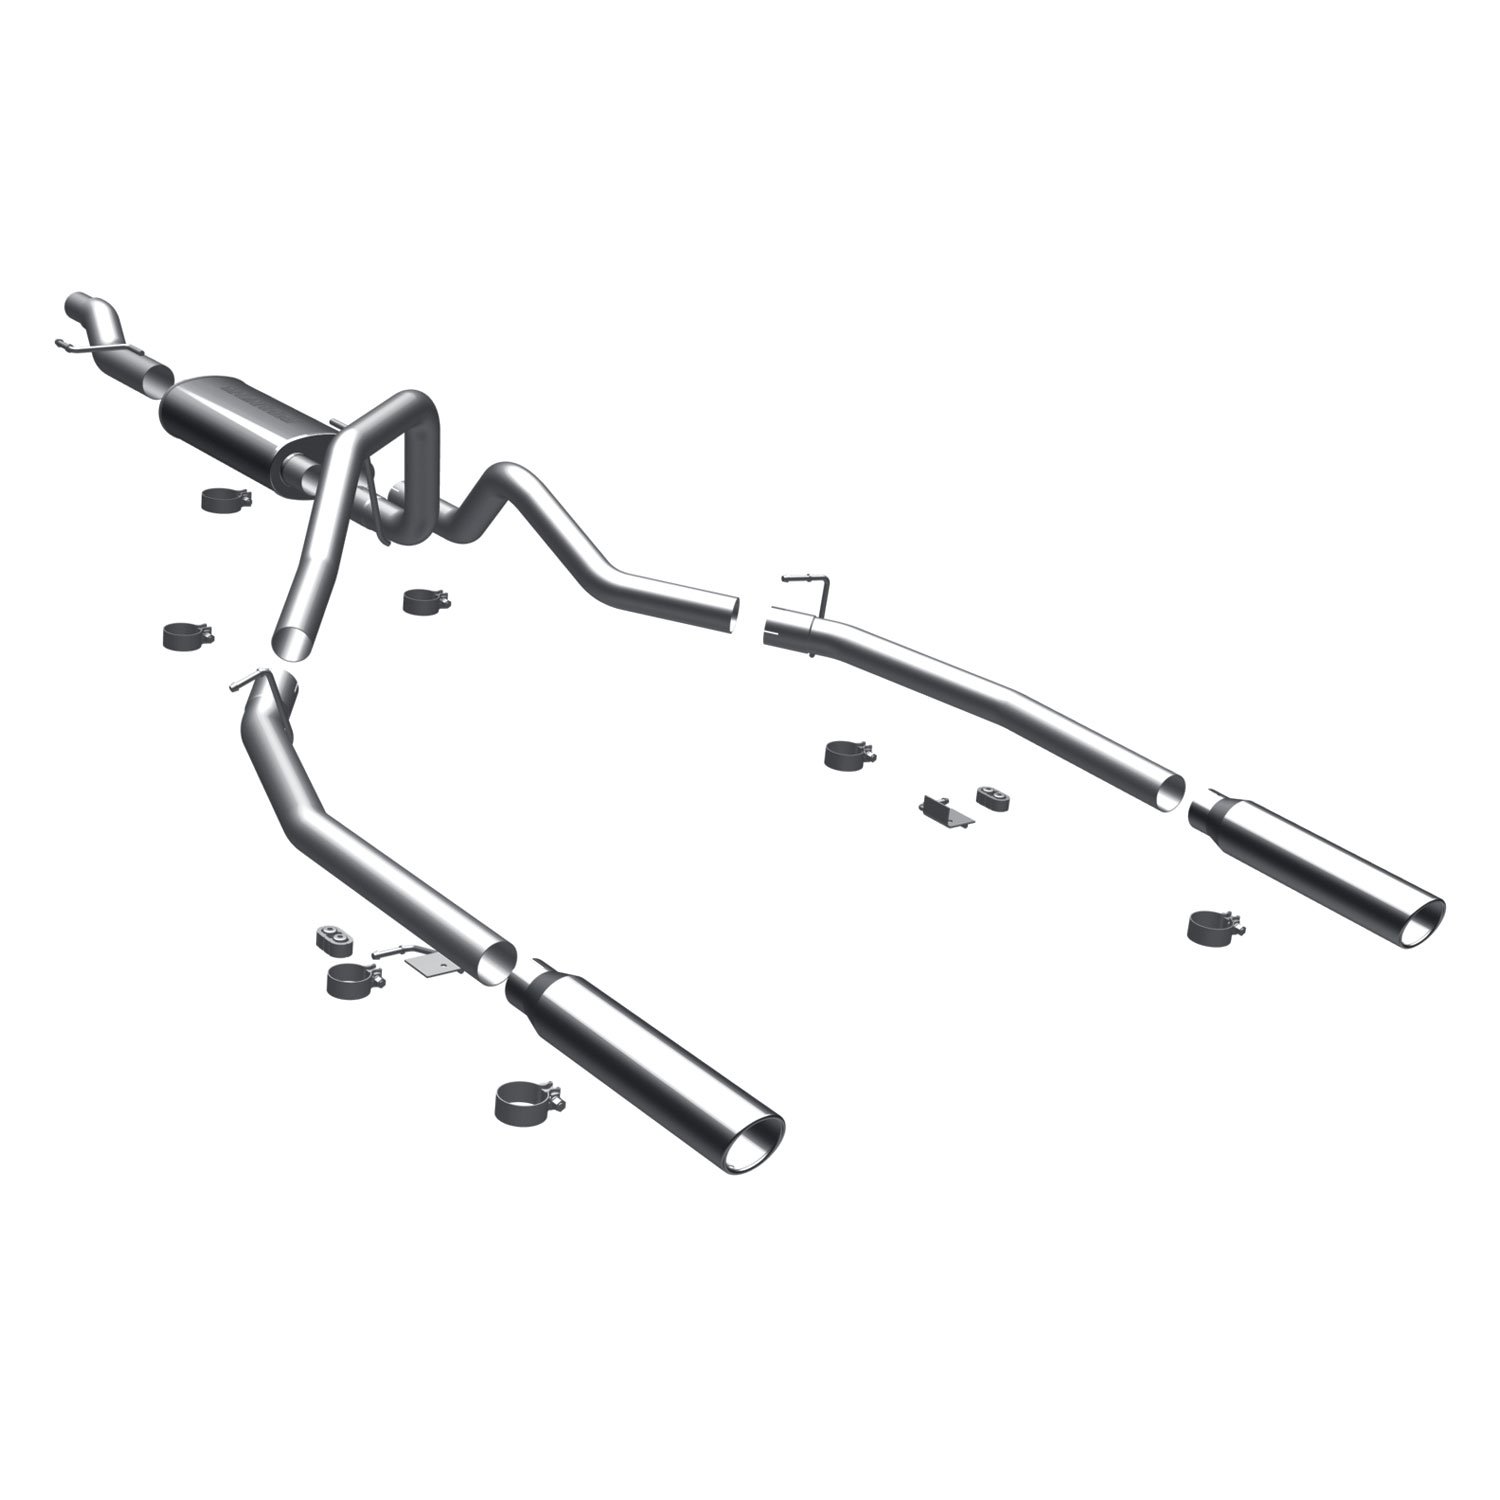 Competition Series Cat-Back Exhaust System 2009-10 F-150 4.6L/5.4L, Standard Cab/Short Bed